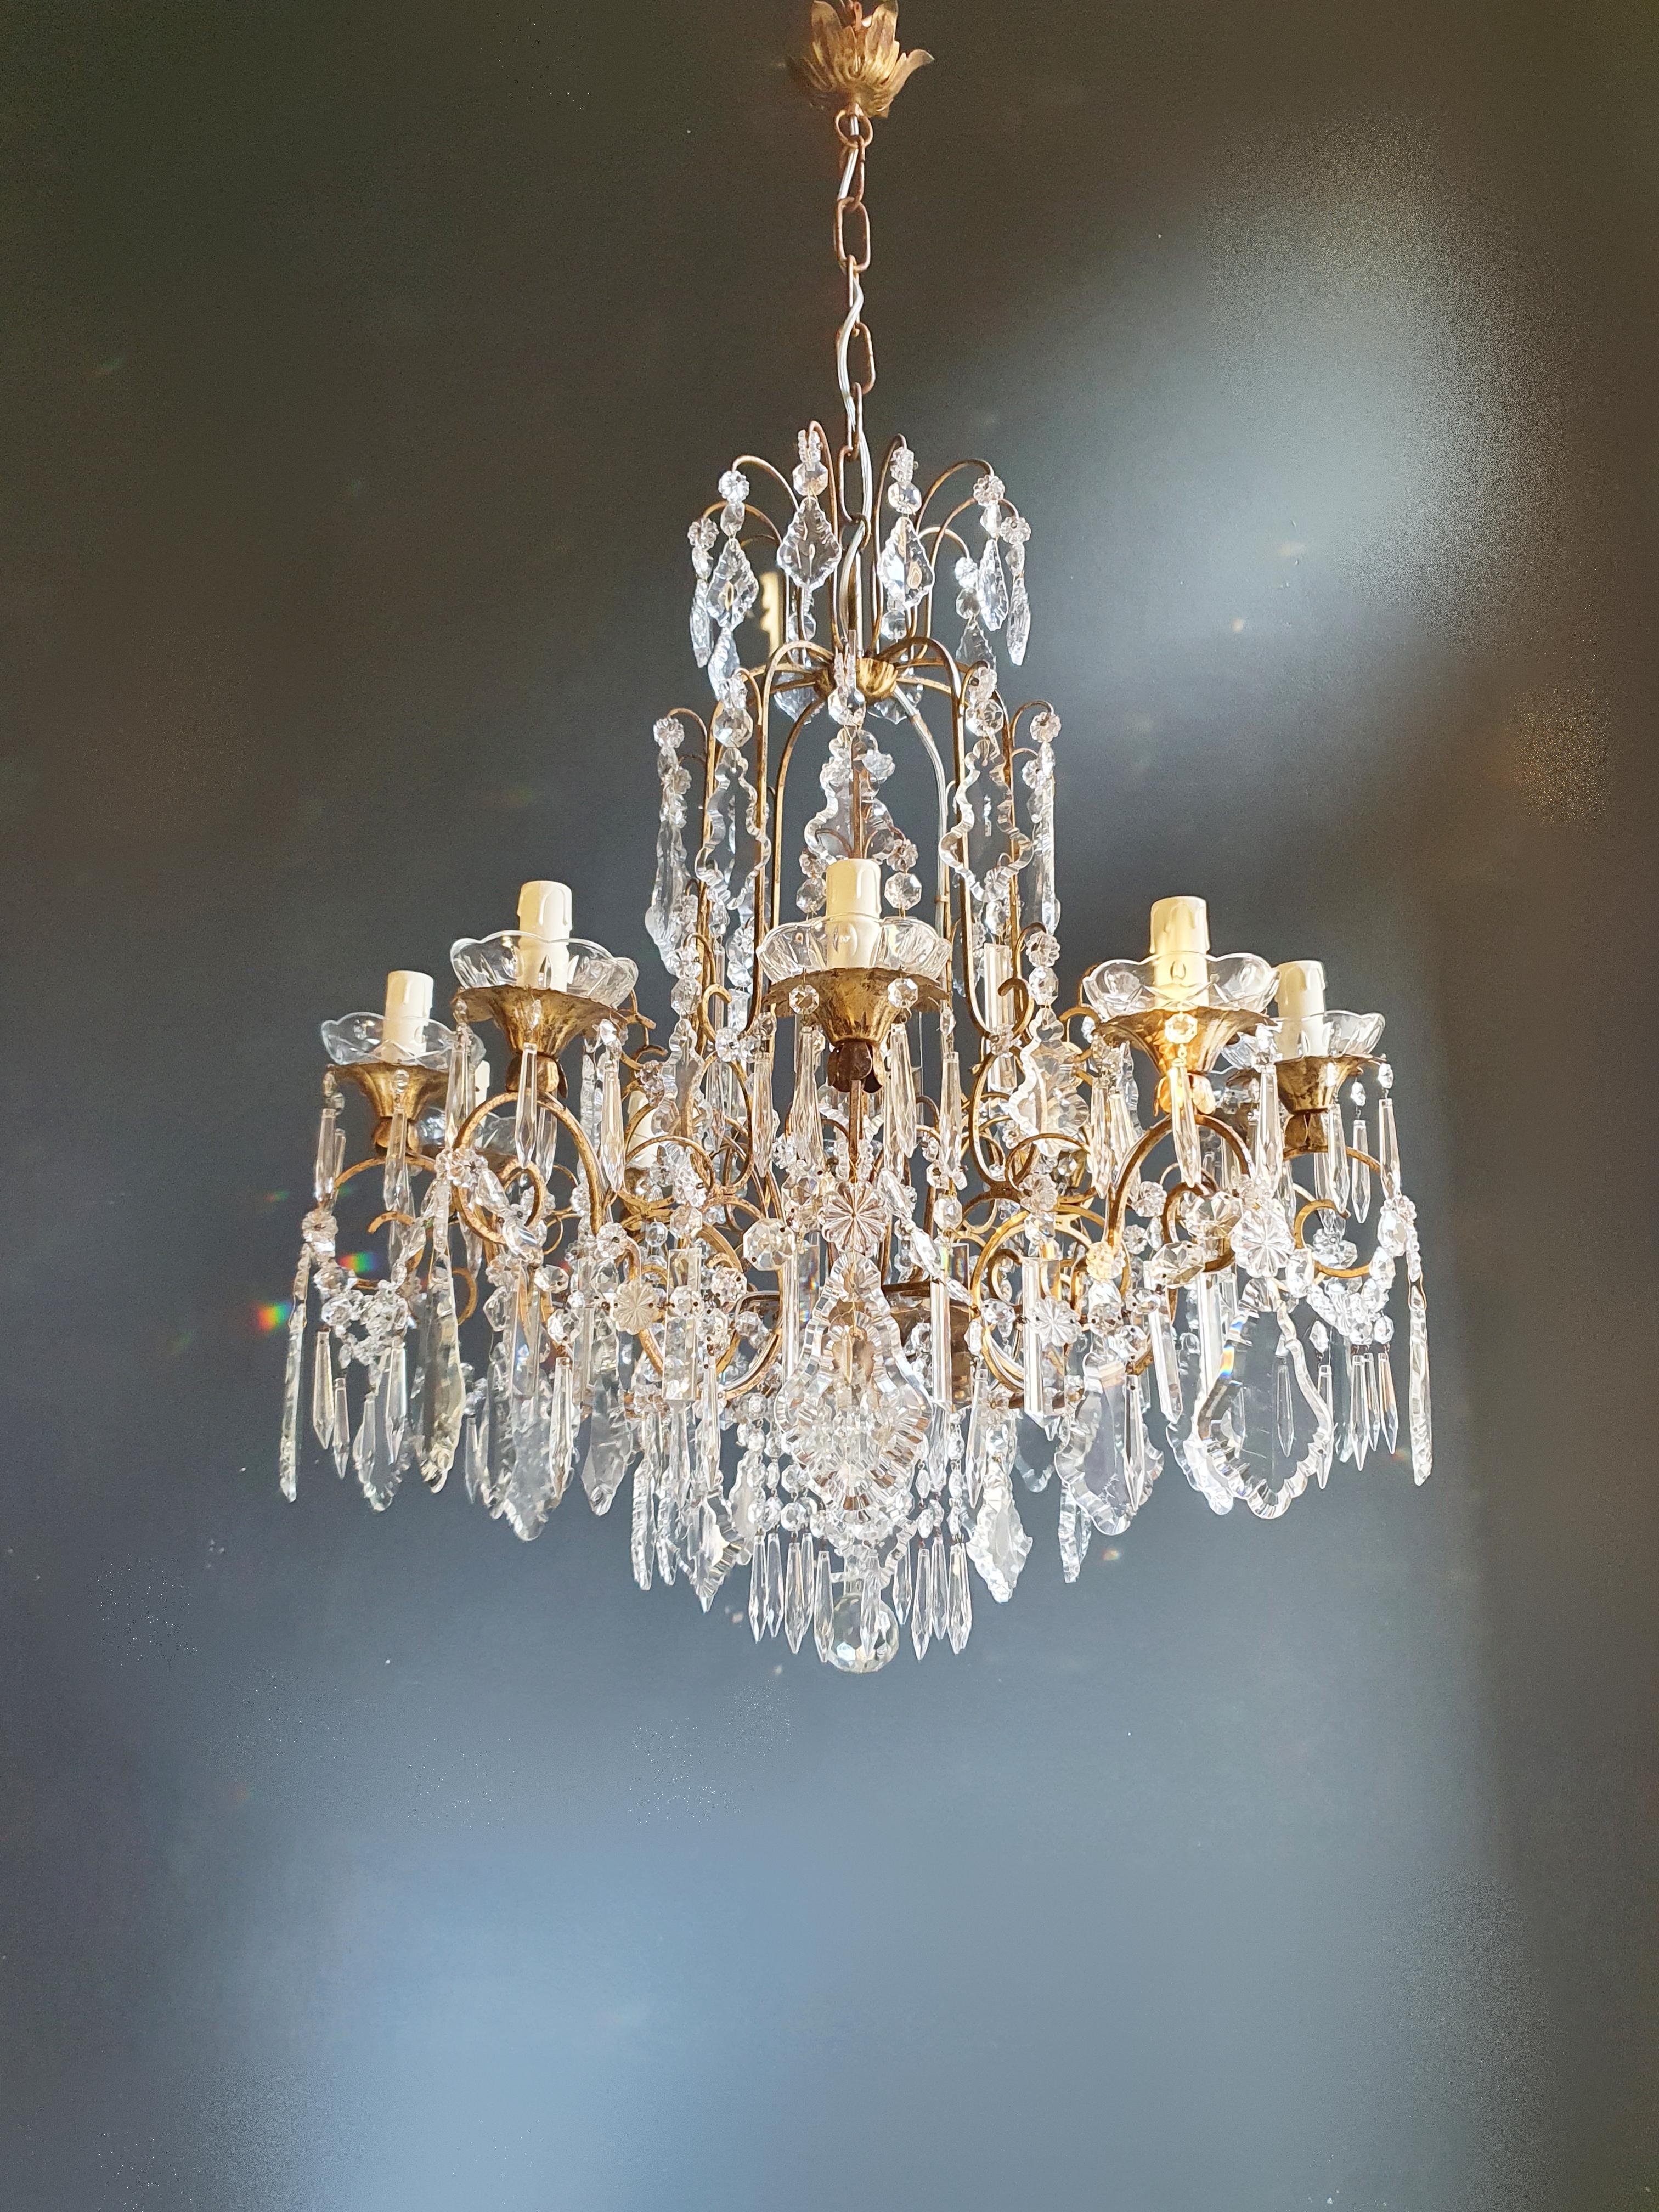 Old chandelier with love and professionally restored in Berlin. electrical wiring works in the US.
Low oval ceiling crystal chandelier brass.
Cabling completely renewed. Crystal hand knotted.

Measures: Total height 120 cm, height without chain 80